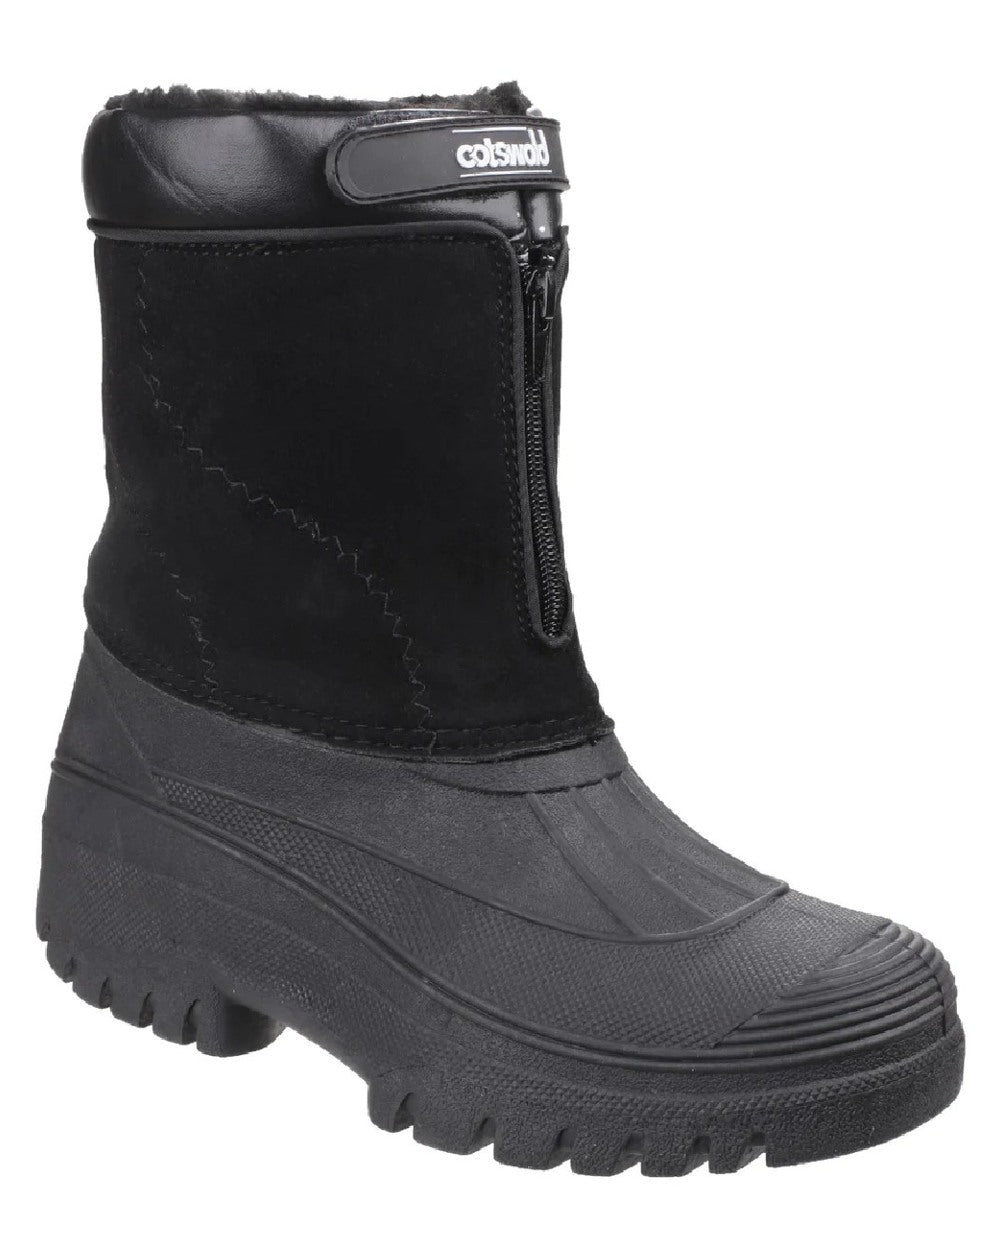 Black coloured Cotswold Mens Venture Waterproof Winter Boots on white background 